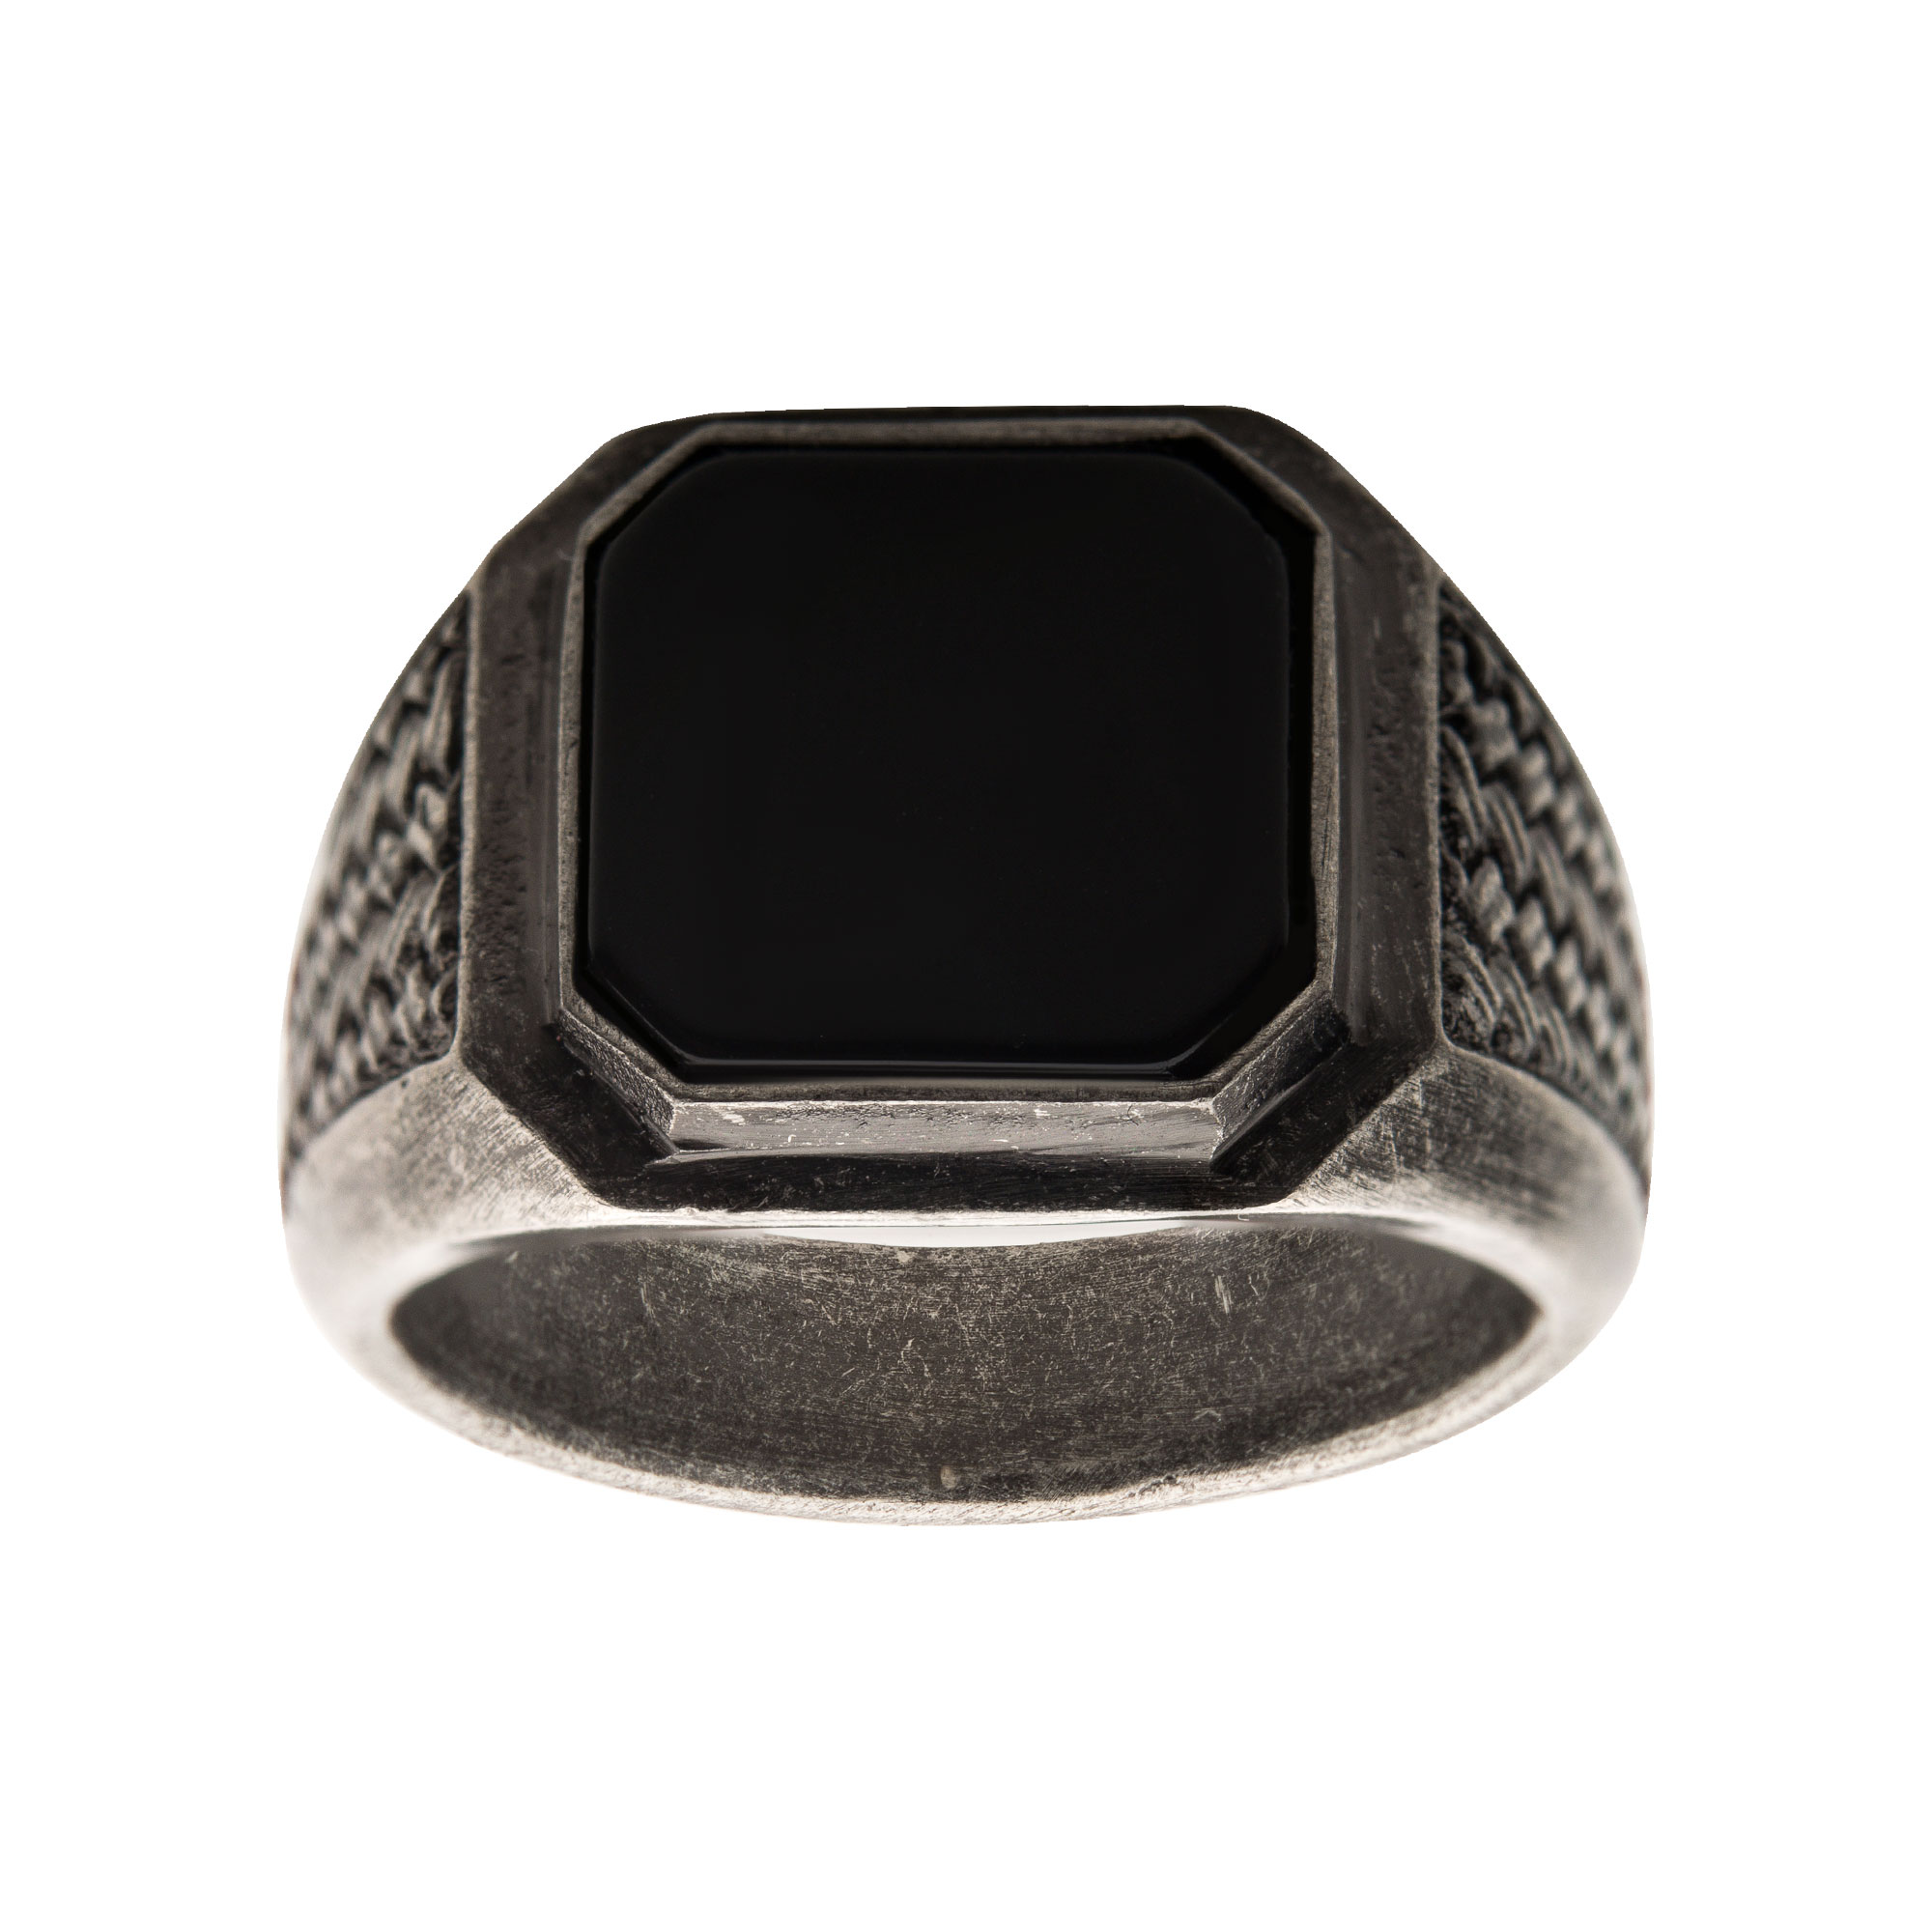 Stainless Steel Silver Plated with Black Agate Stone Ring Image 2 Ken Walker Jewelers Gig Harbor, WA